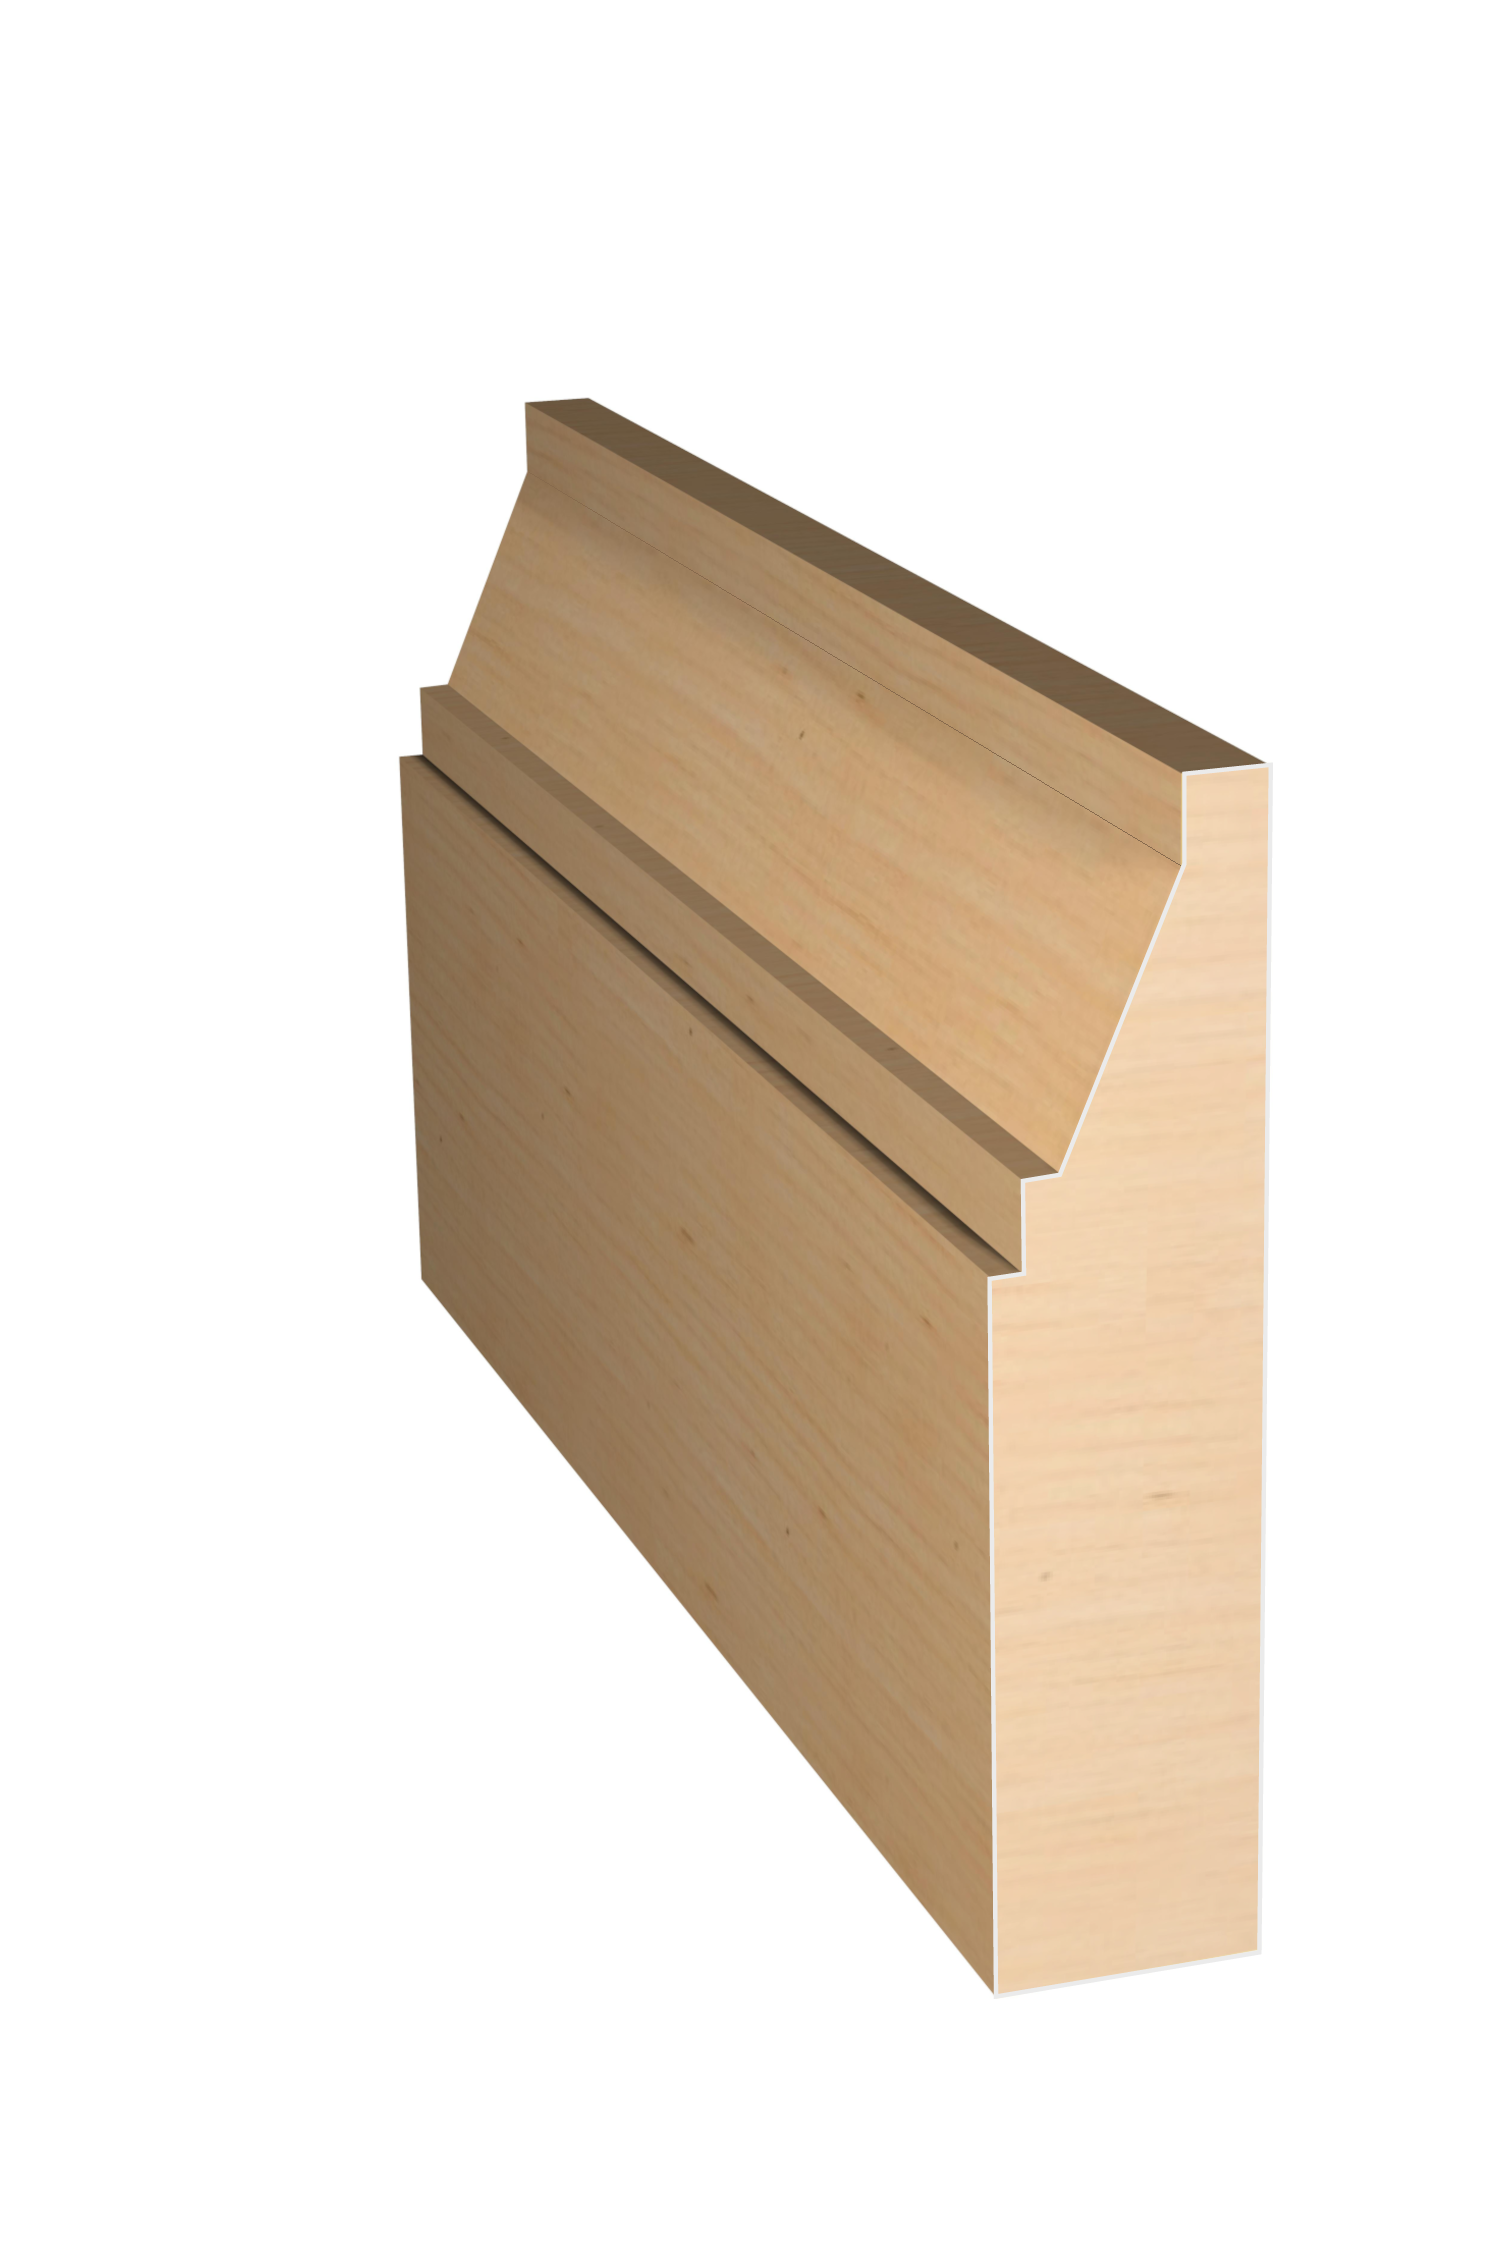 Three dimensional rendering of contemporary stock casing wood molding CAPL31426 made by Public Lumber Company in Detroit.